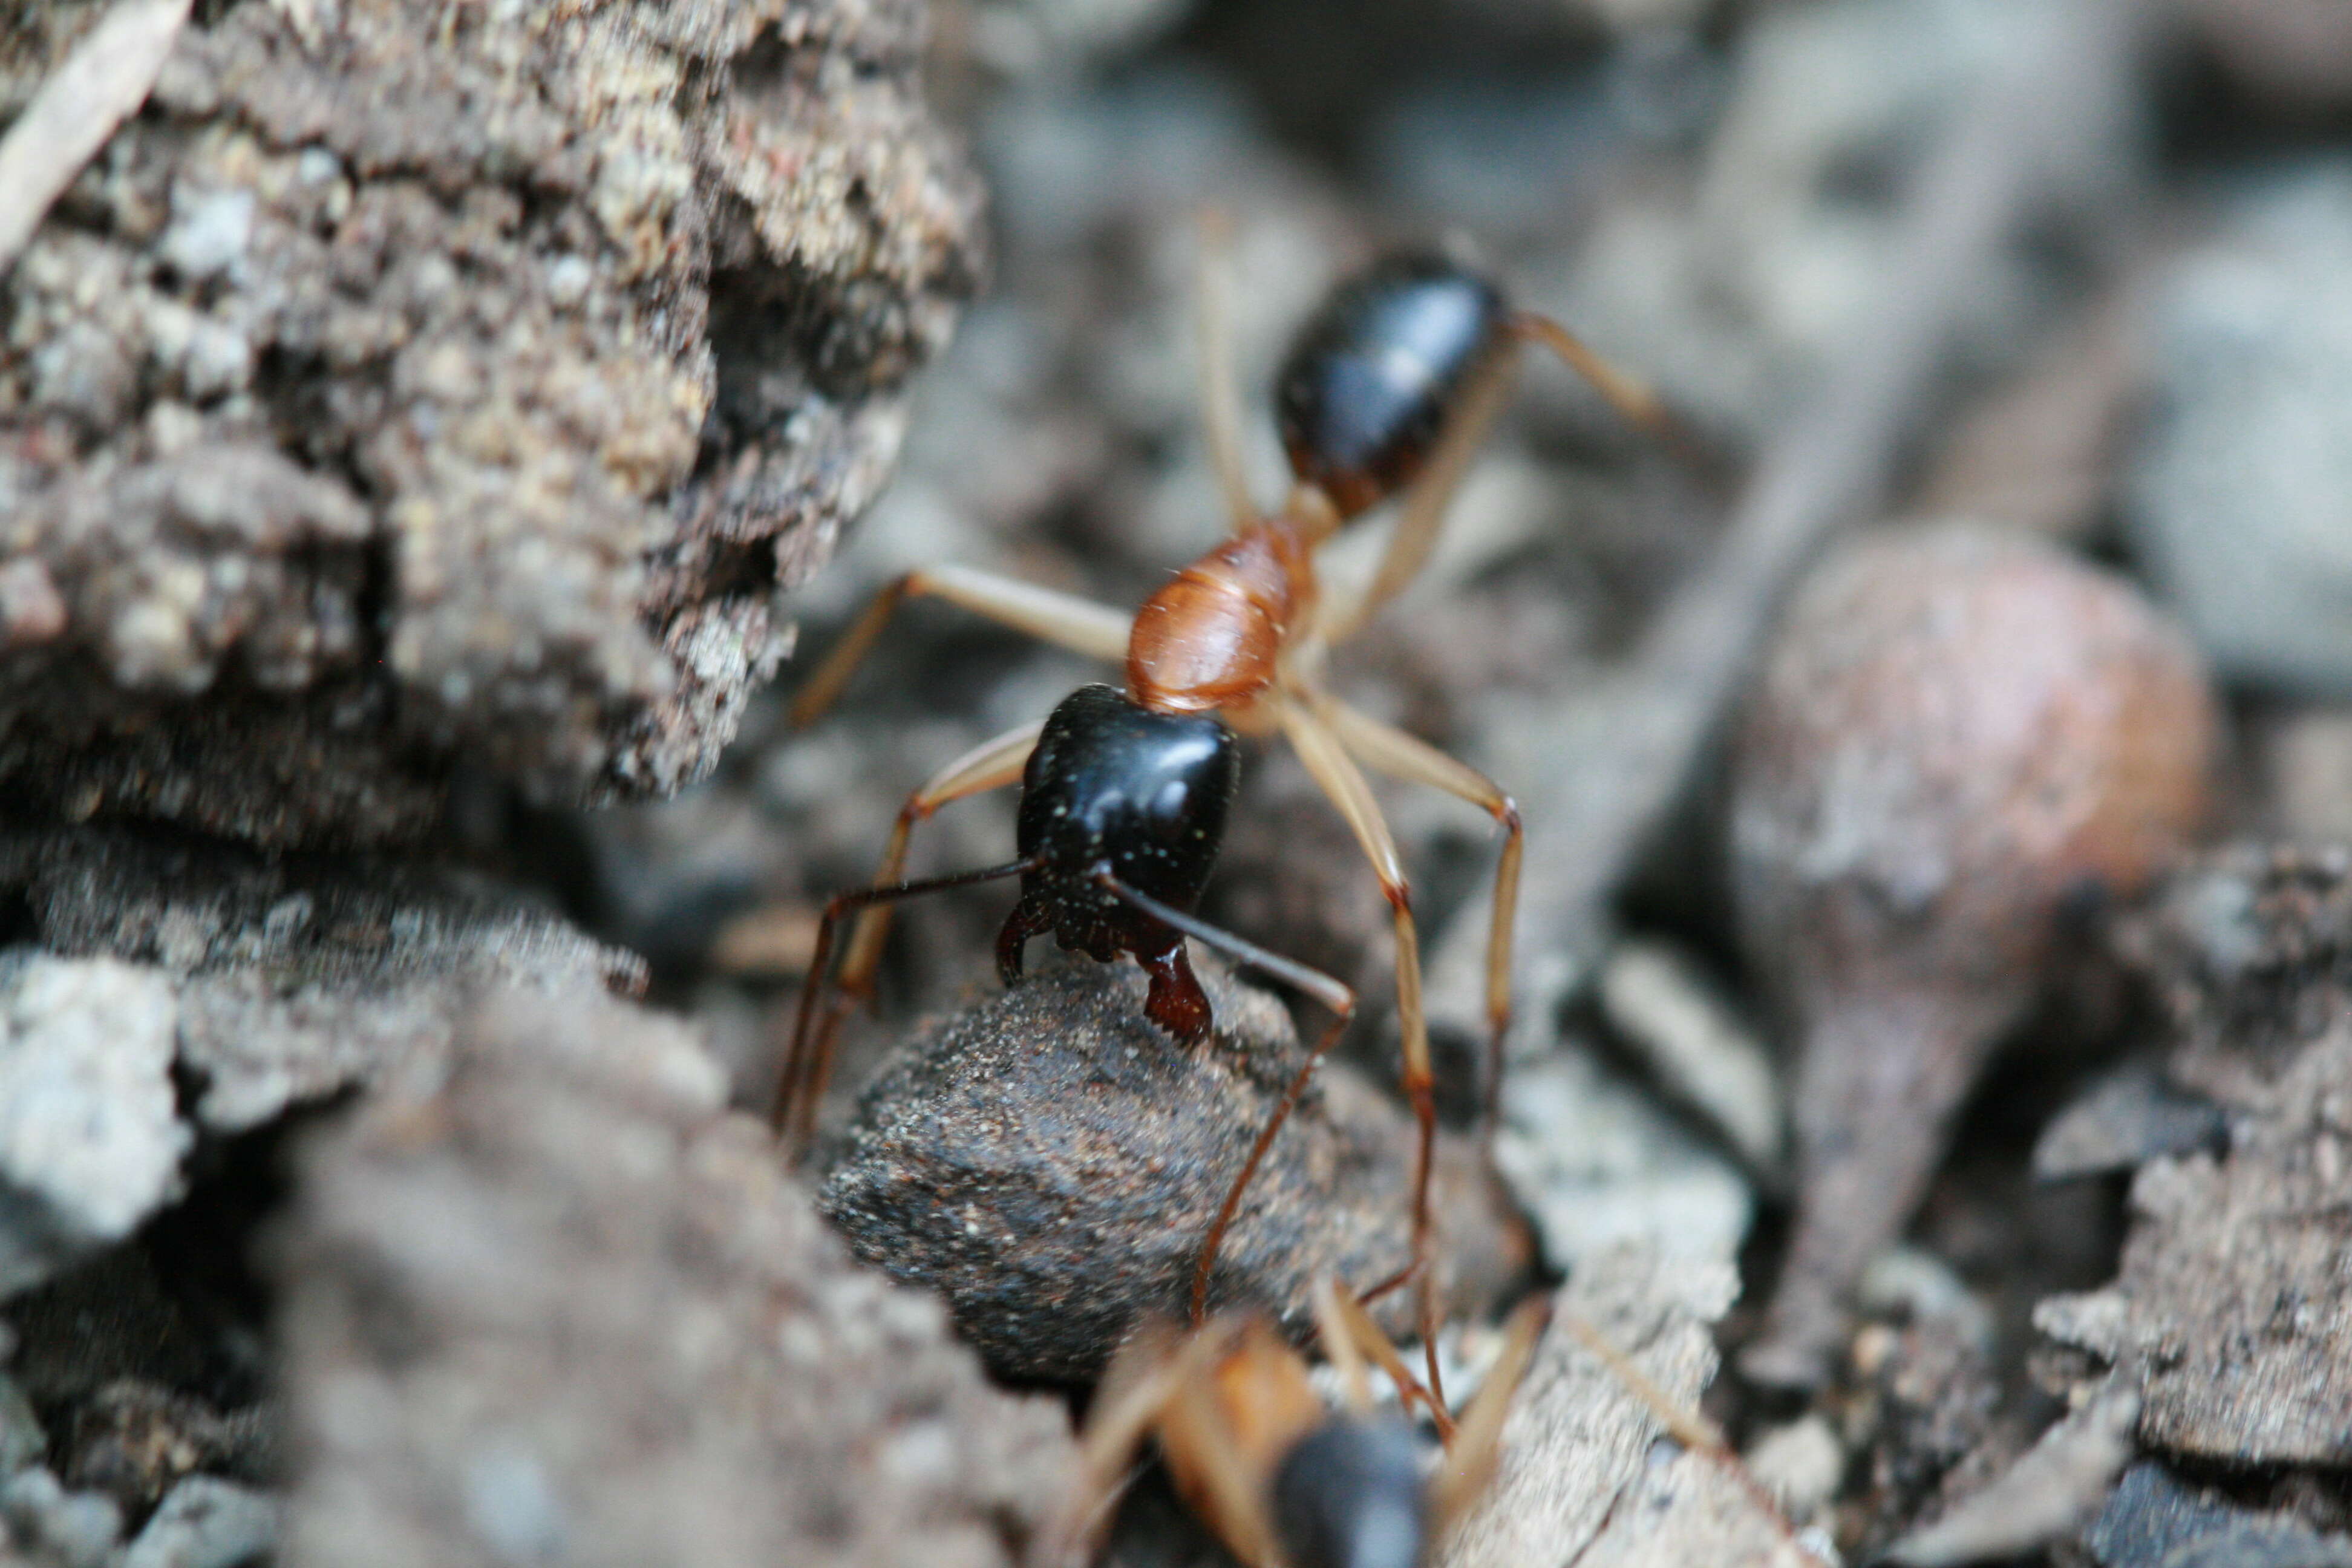 Image of Camponotus nigriceps (Smith 1858)